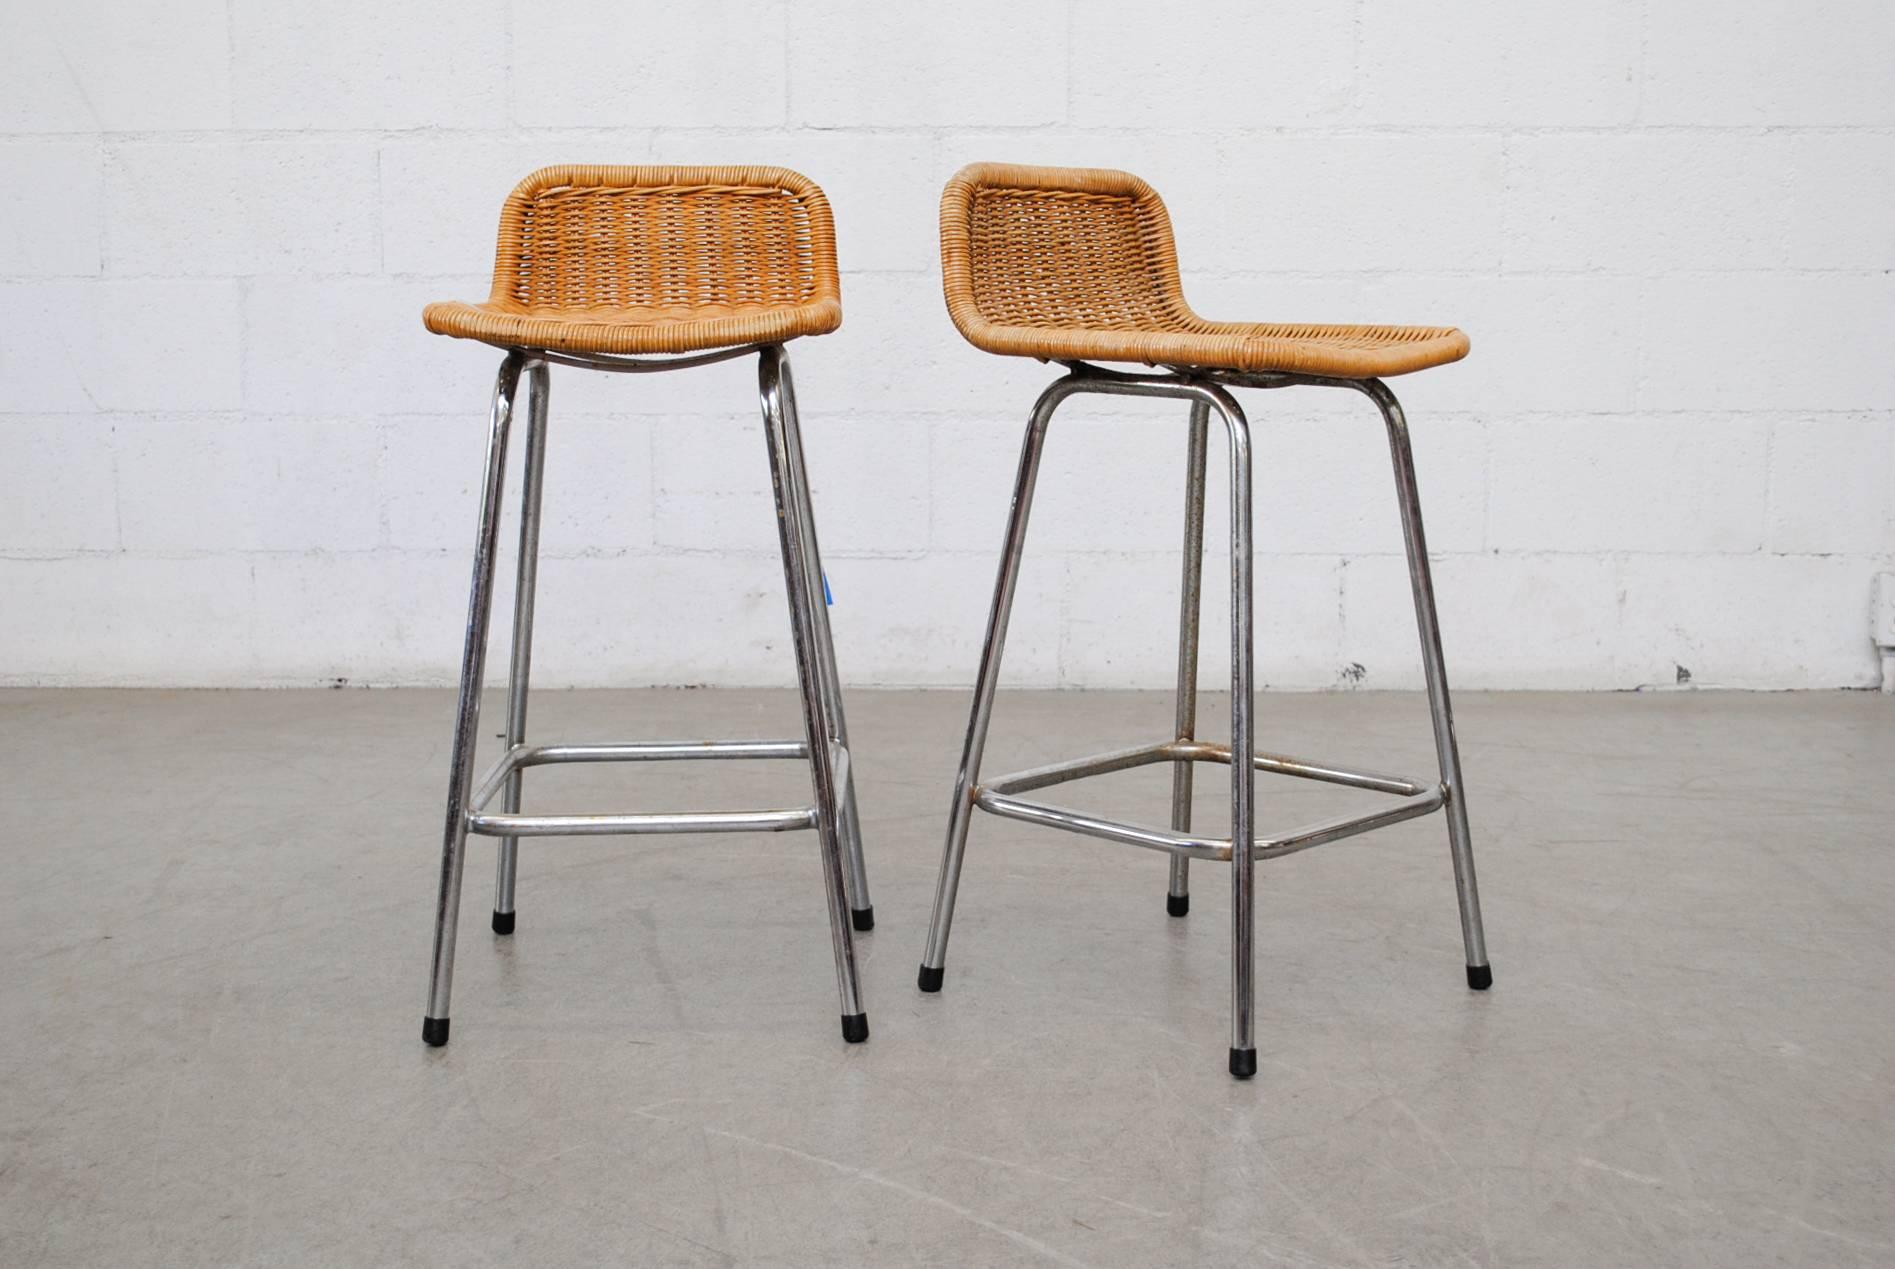 Pair of Charlotte Perriand style counter stools with wicker seating and chrome frame. Good original condition with nice patina to wicker, chrome is visibly worn, consistent with its age and usage. Set price.